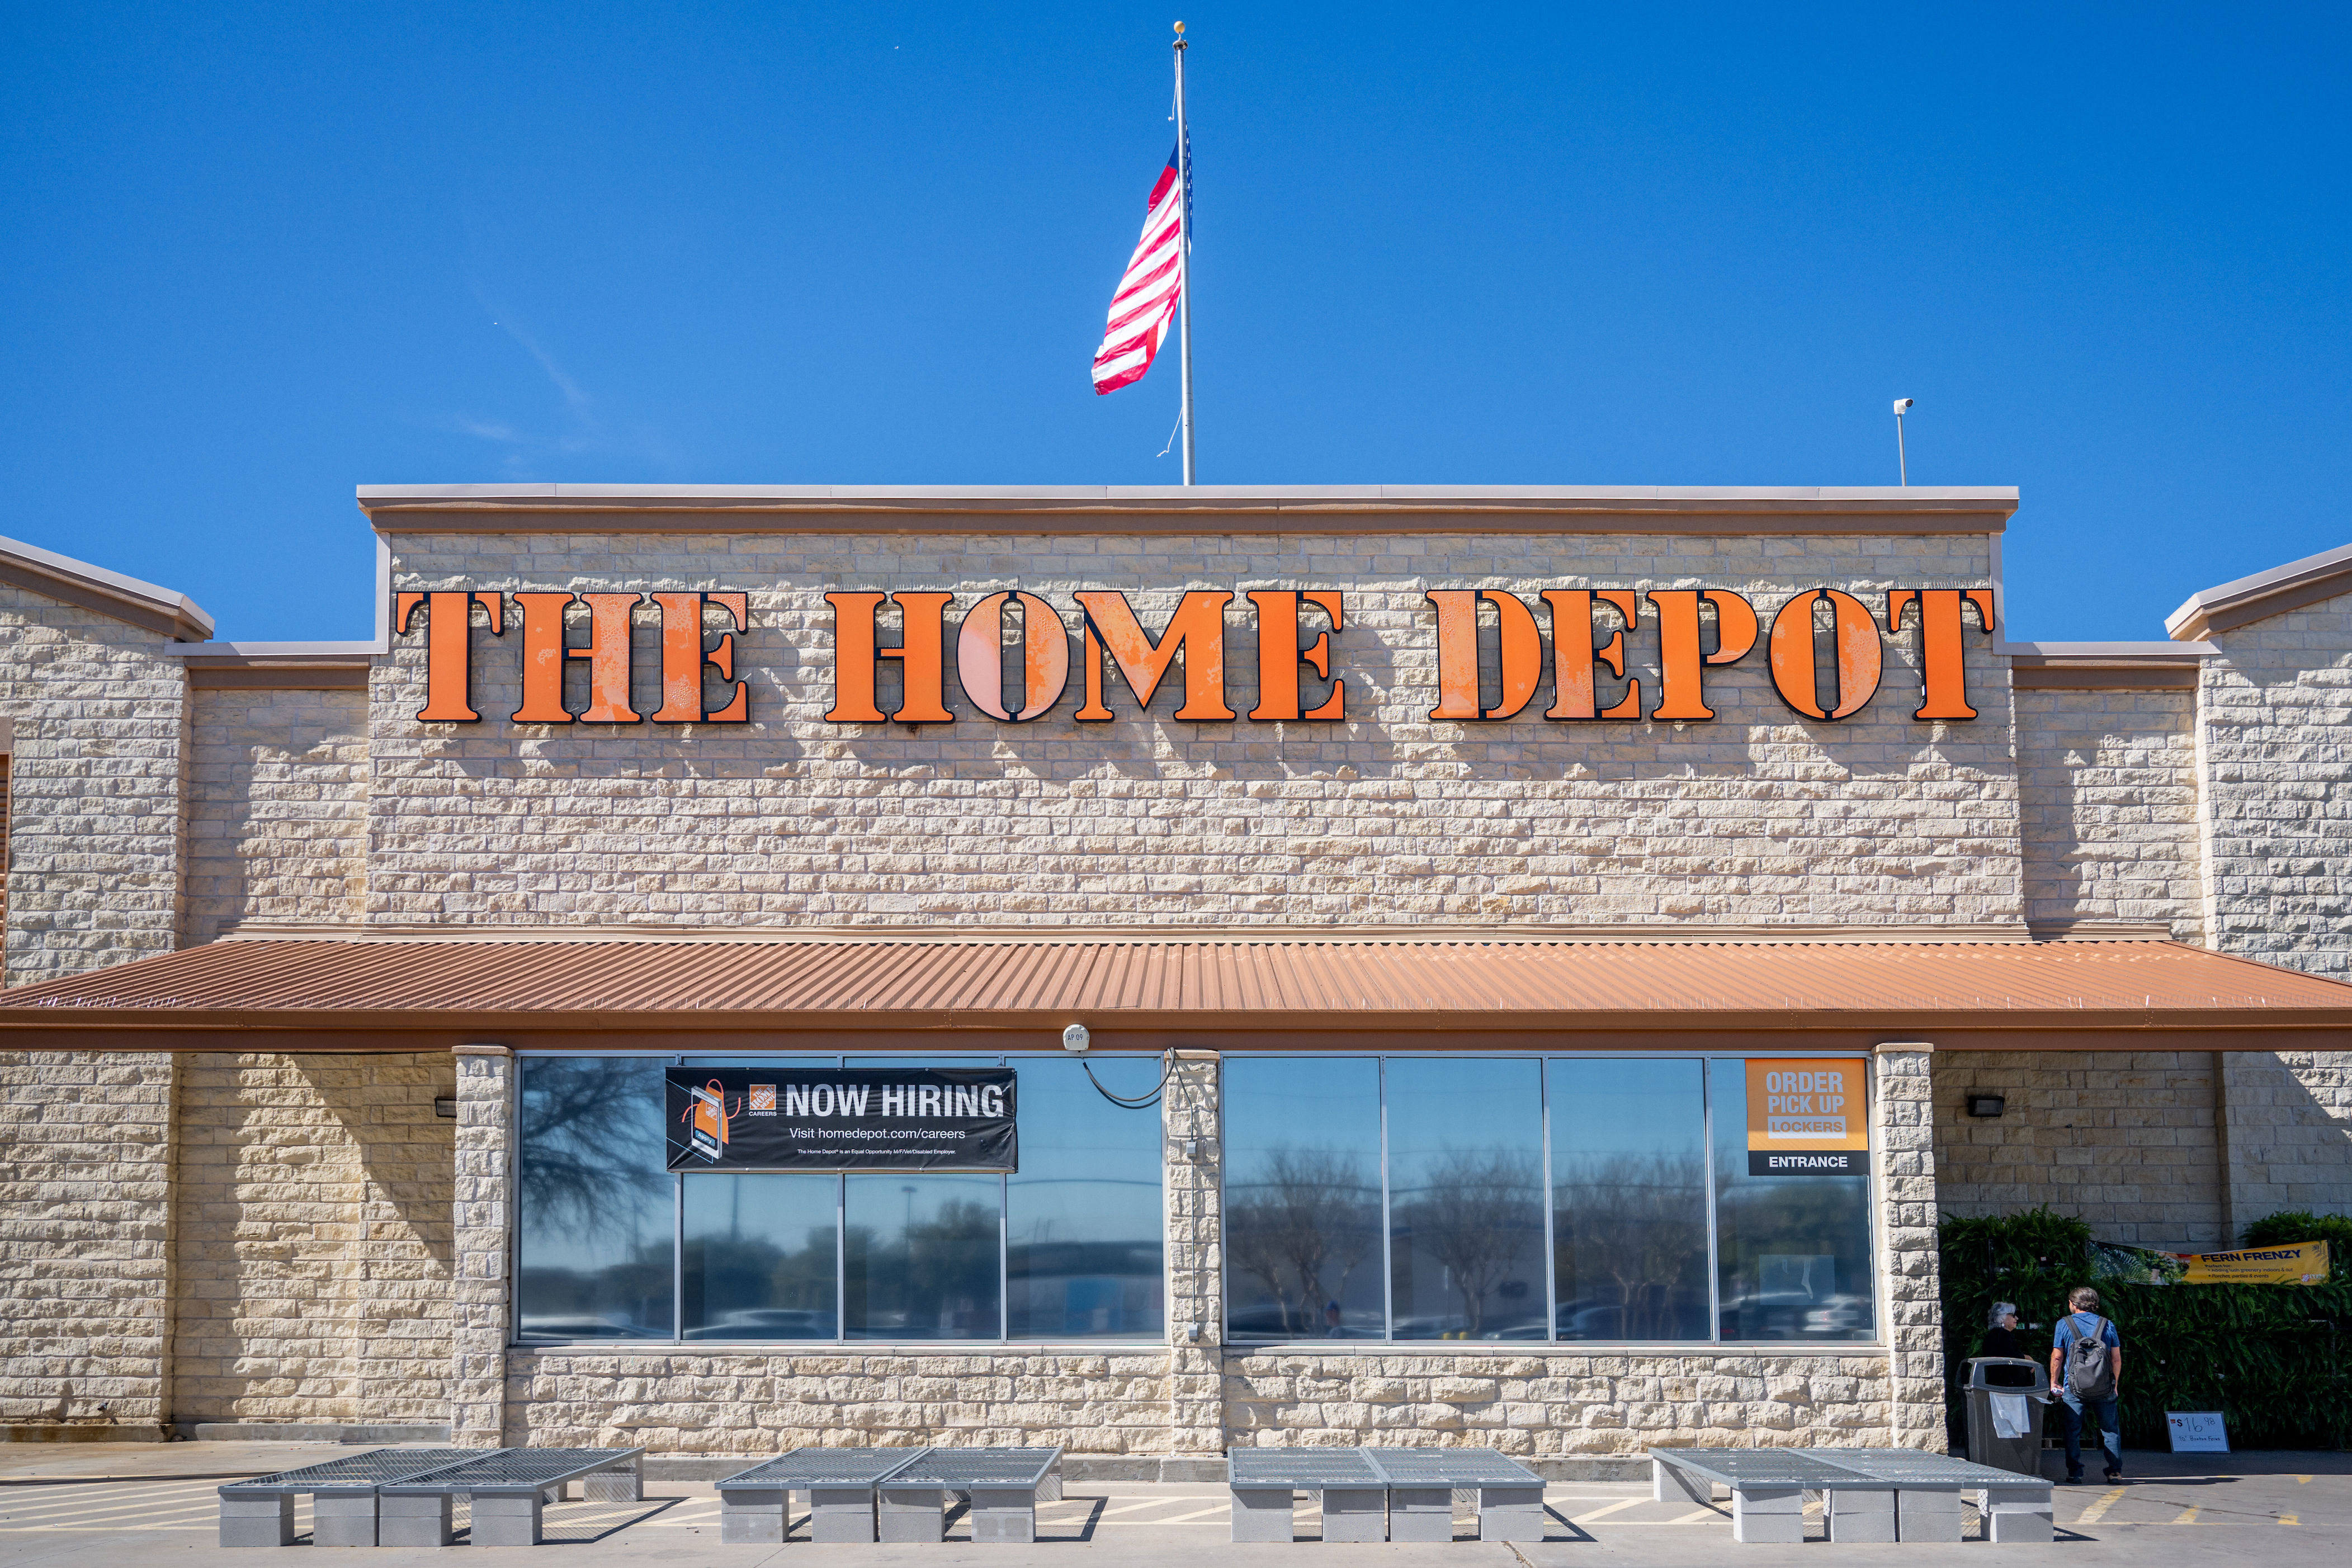 home depot broke law by making workers remove 'black lives matter,' nlrb rules